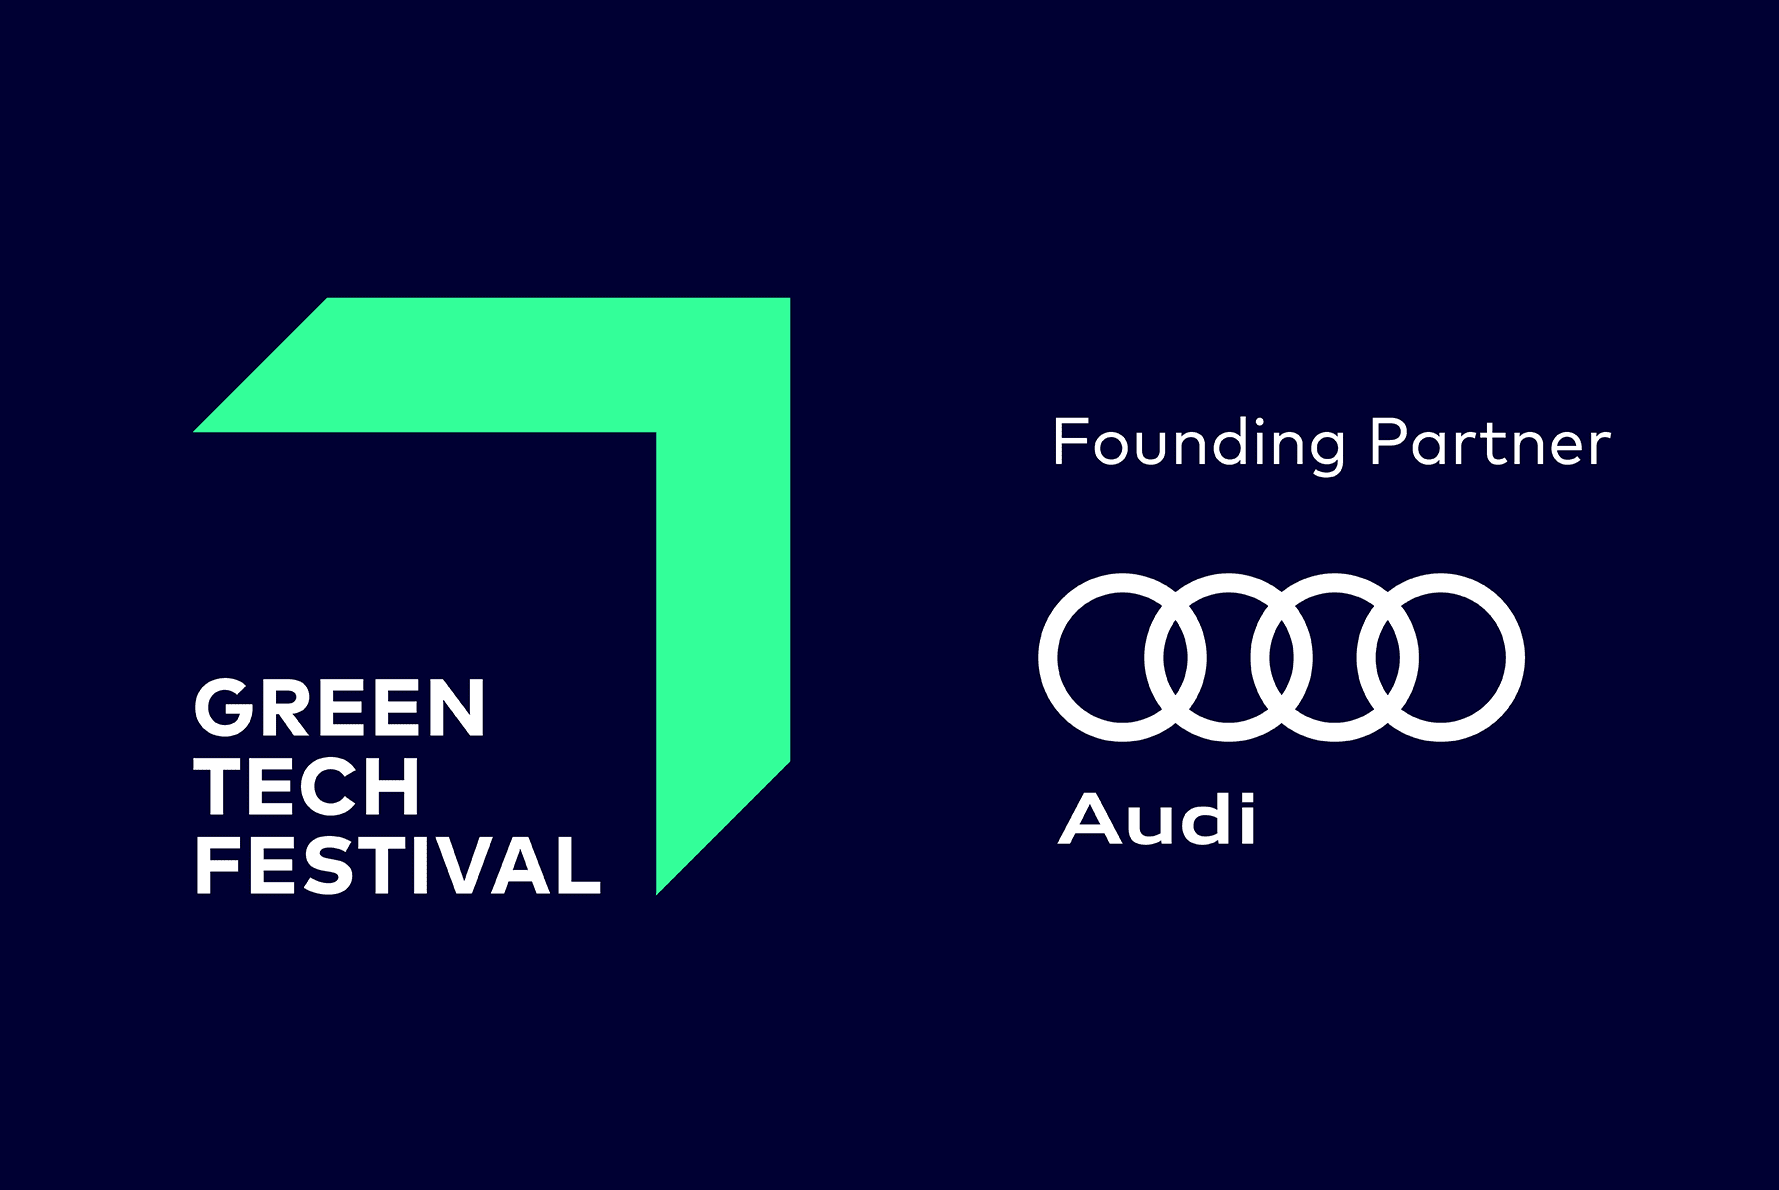 Audi is a founding partner of the GREENTECH FESTIVAL